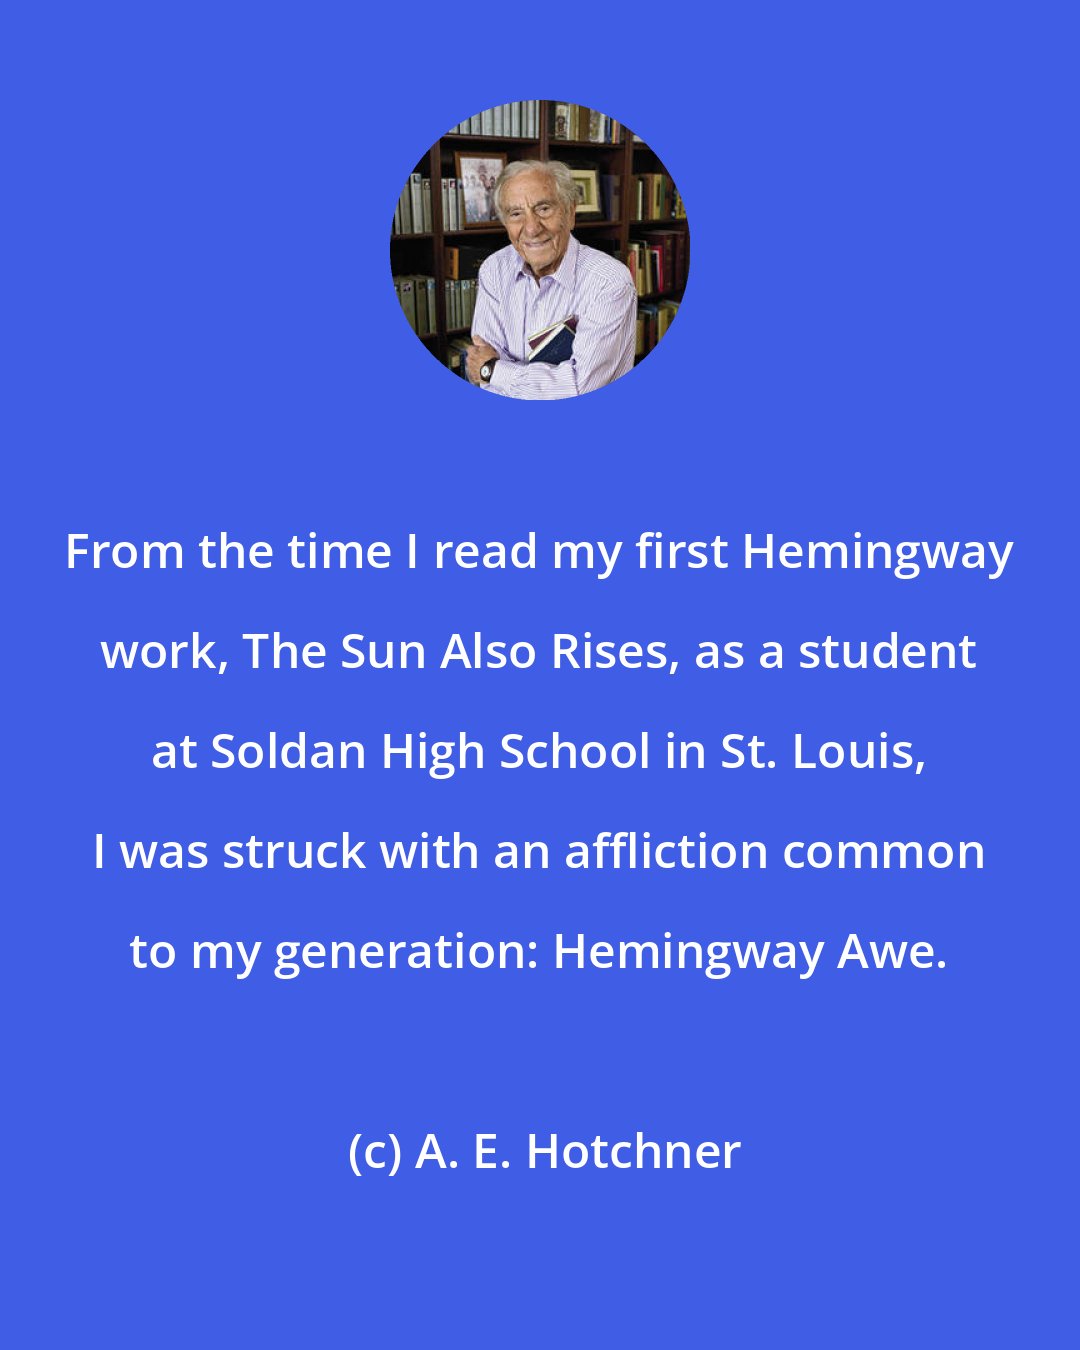 A. E. Hotchner: From the time I read my first Hemingway work, The Sun Also Rises, as a student at Soldan High School in St. Louis, I was struck with an affliction common to my generation: Hemingway Awe.